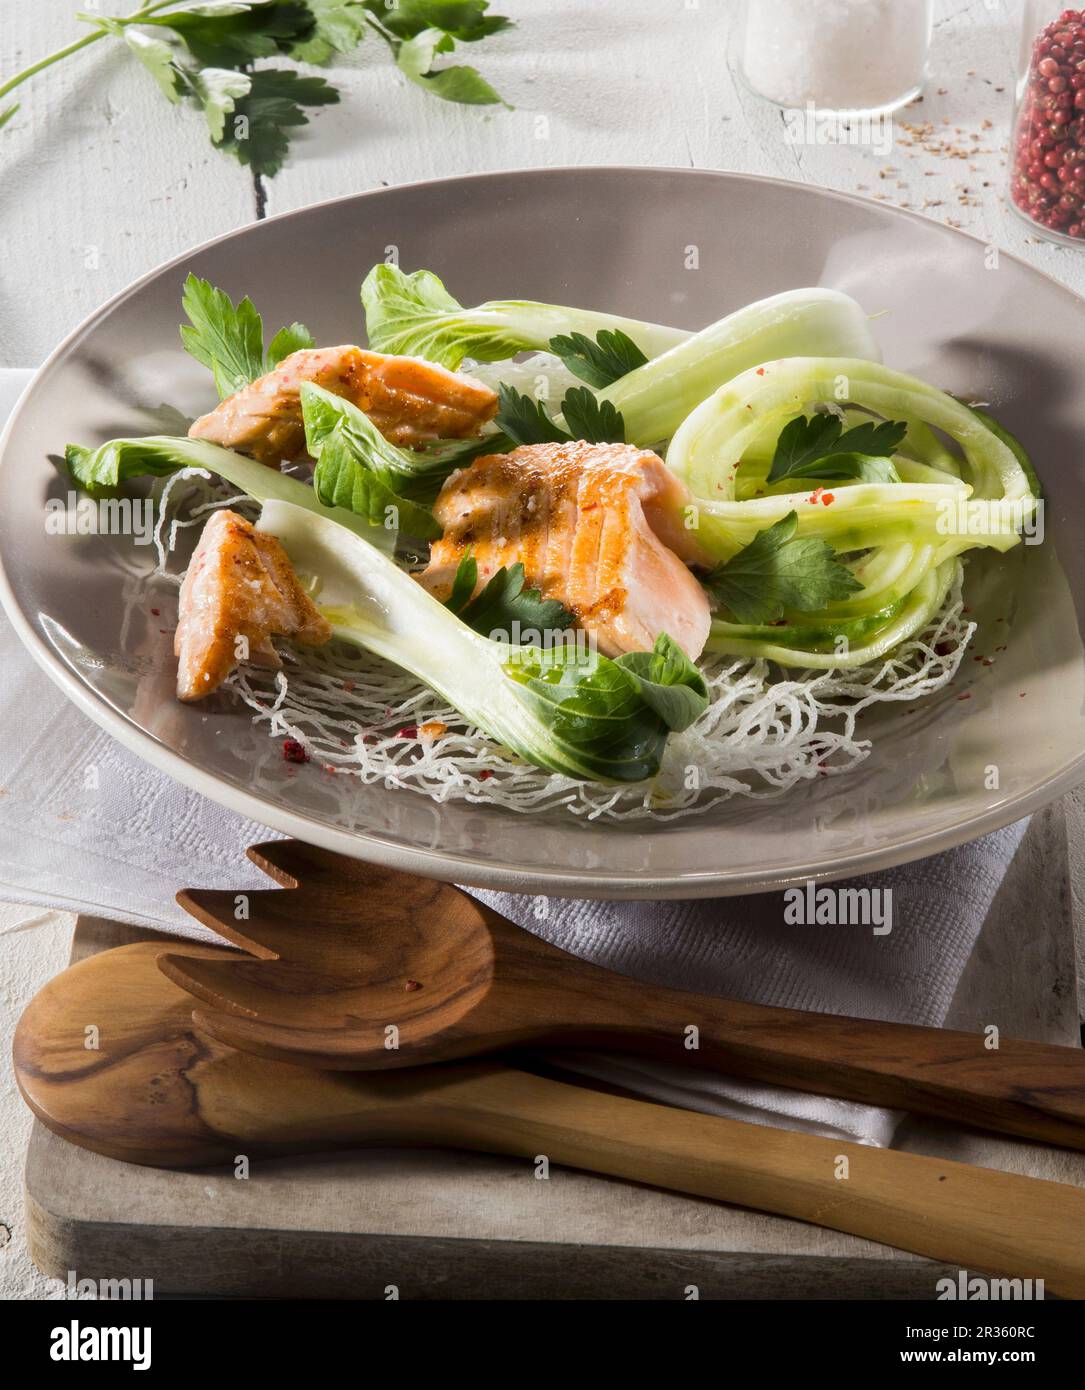 Salmon and bok choy on a bed of glass noodles on a plate with wooden cutlery Stock Photo